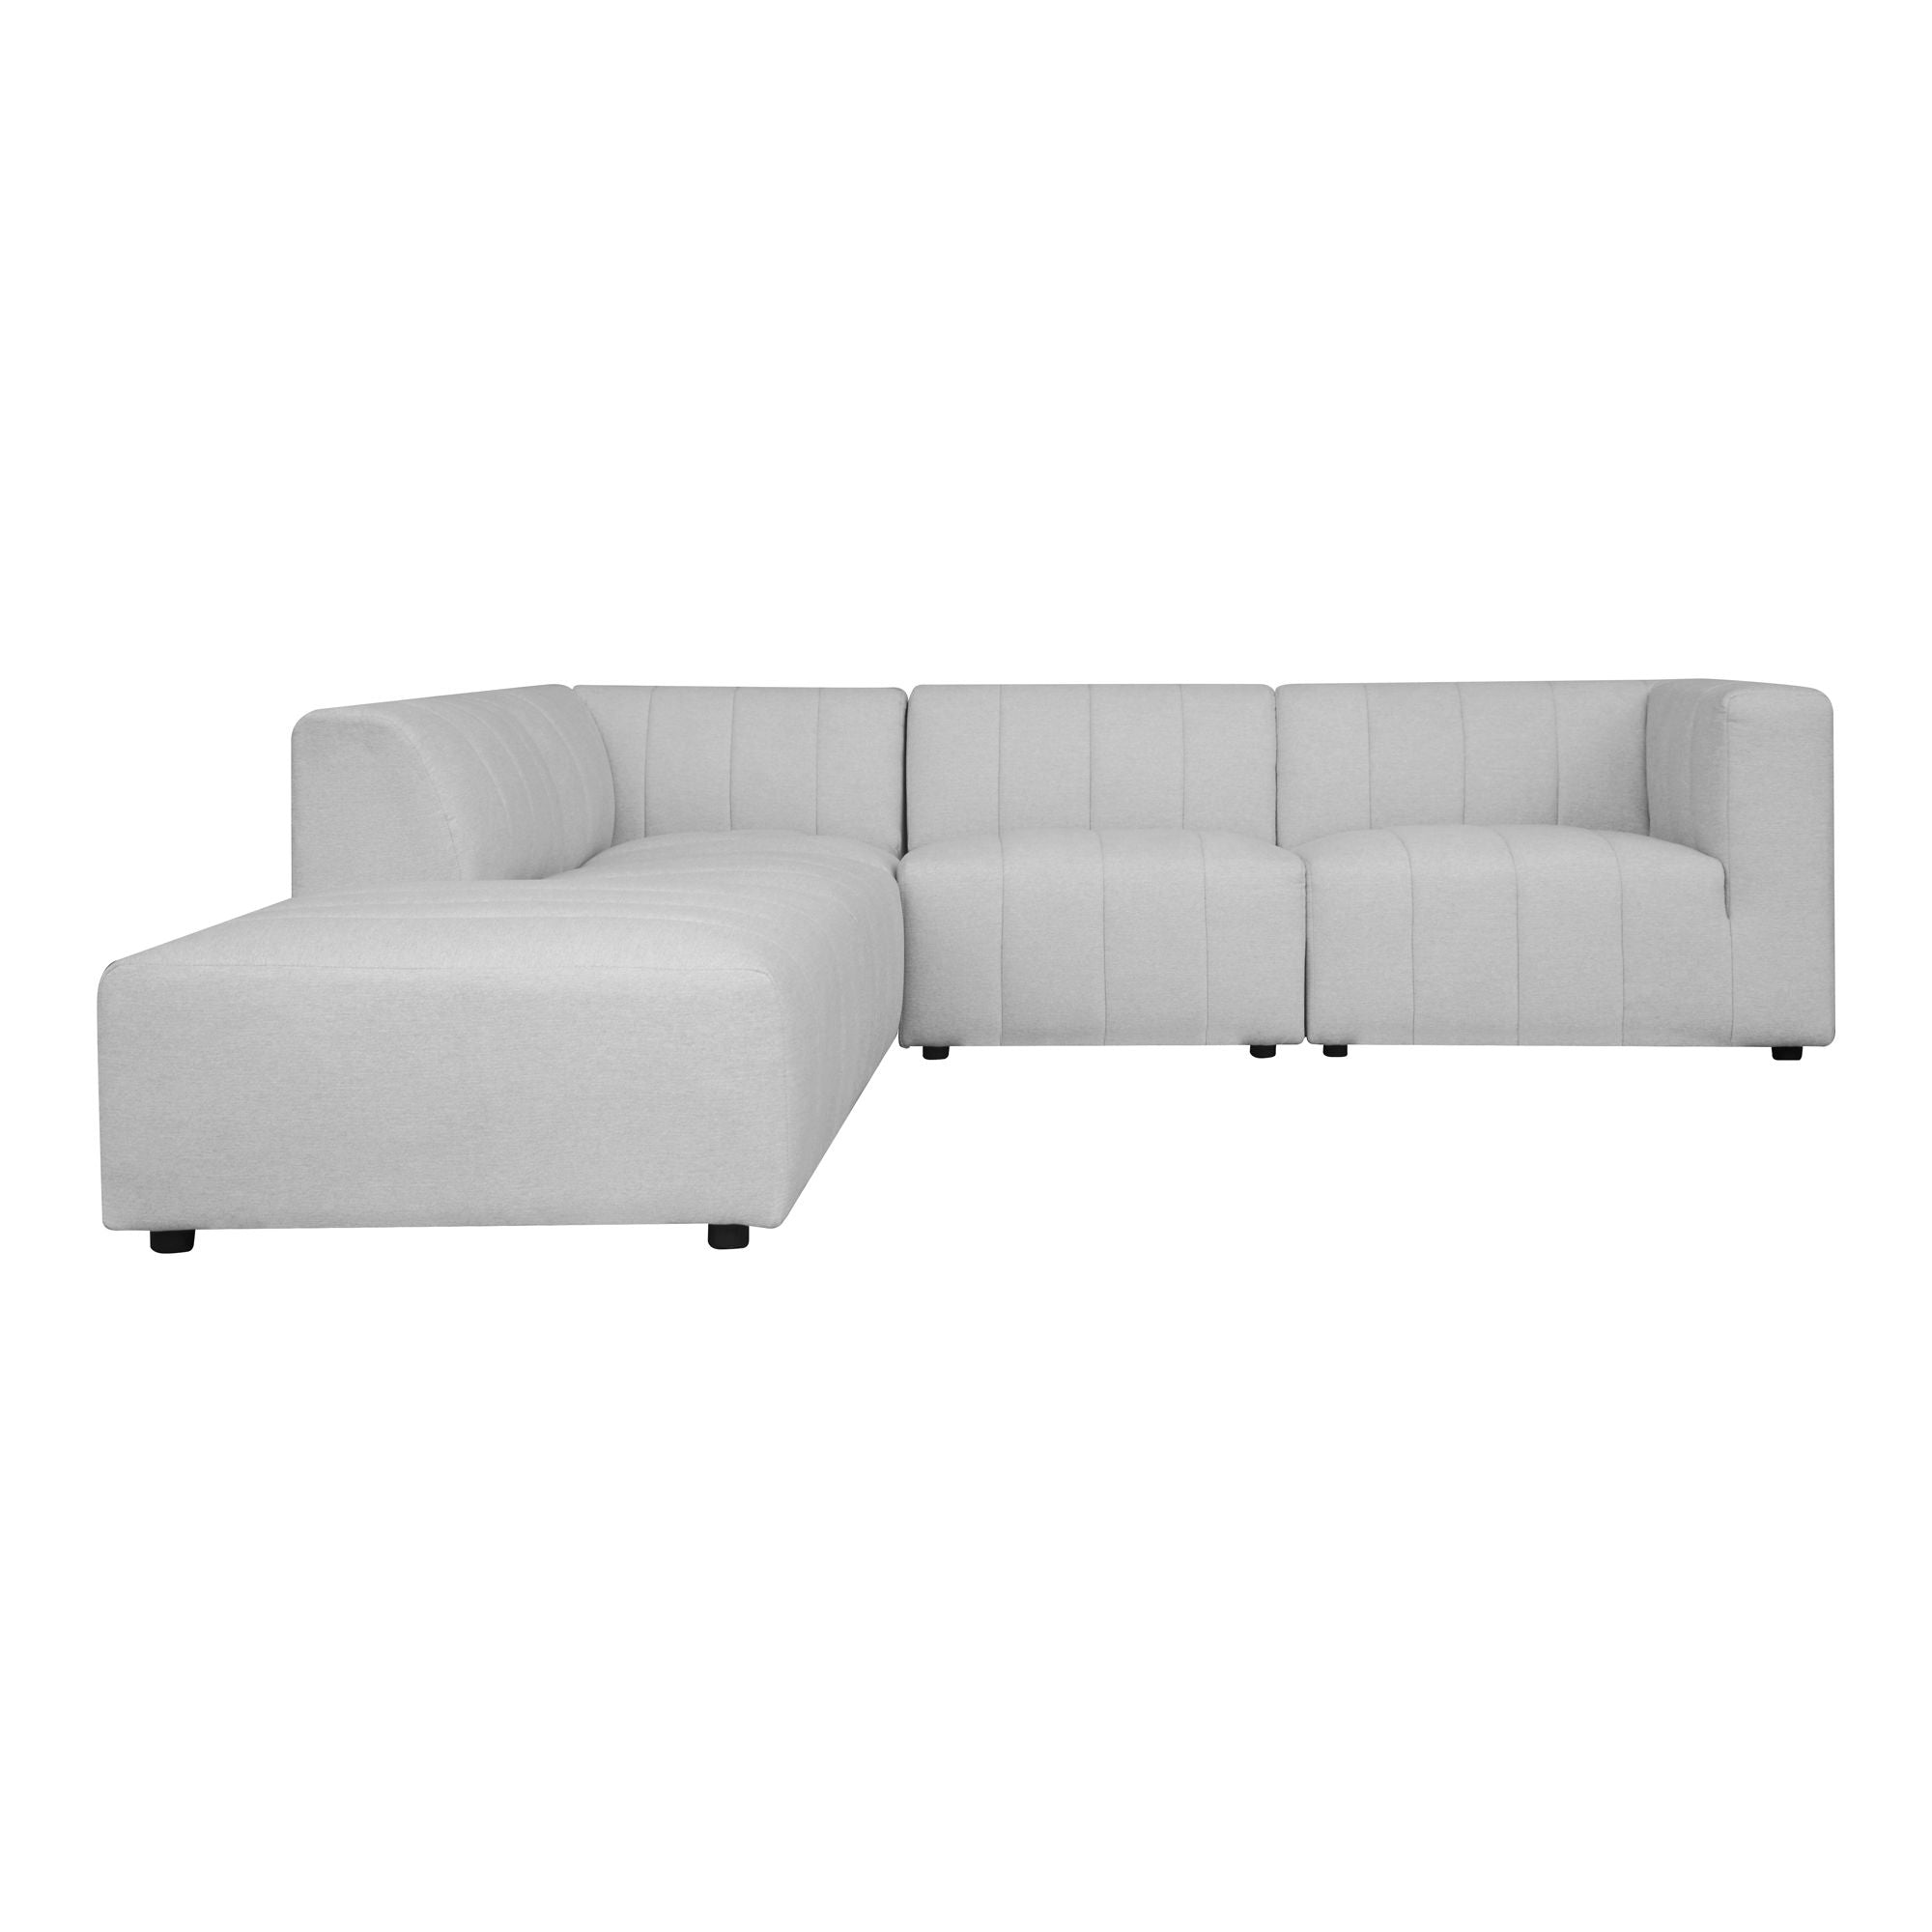 Lyric - Dream Modular Sectional Left Oatmeal - Pearl Silver-Stationary Sectionals-American Furniture Outlet